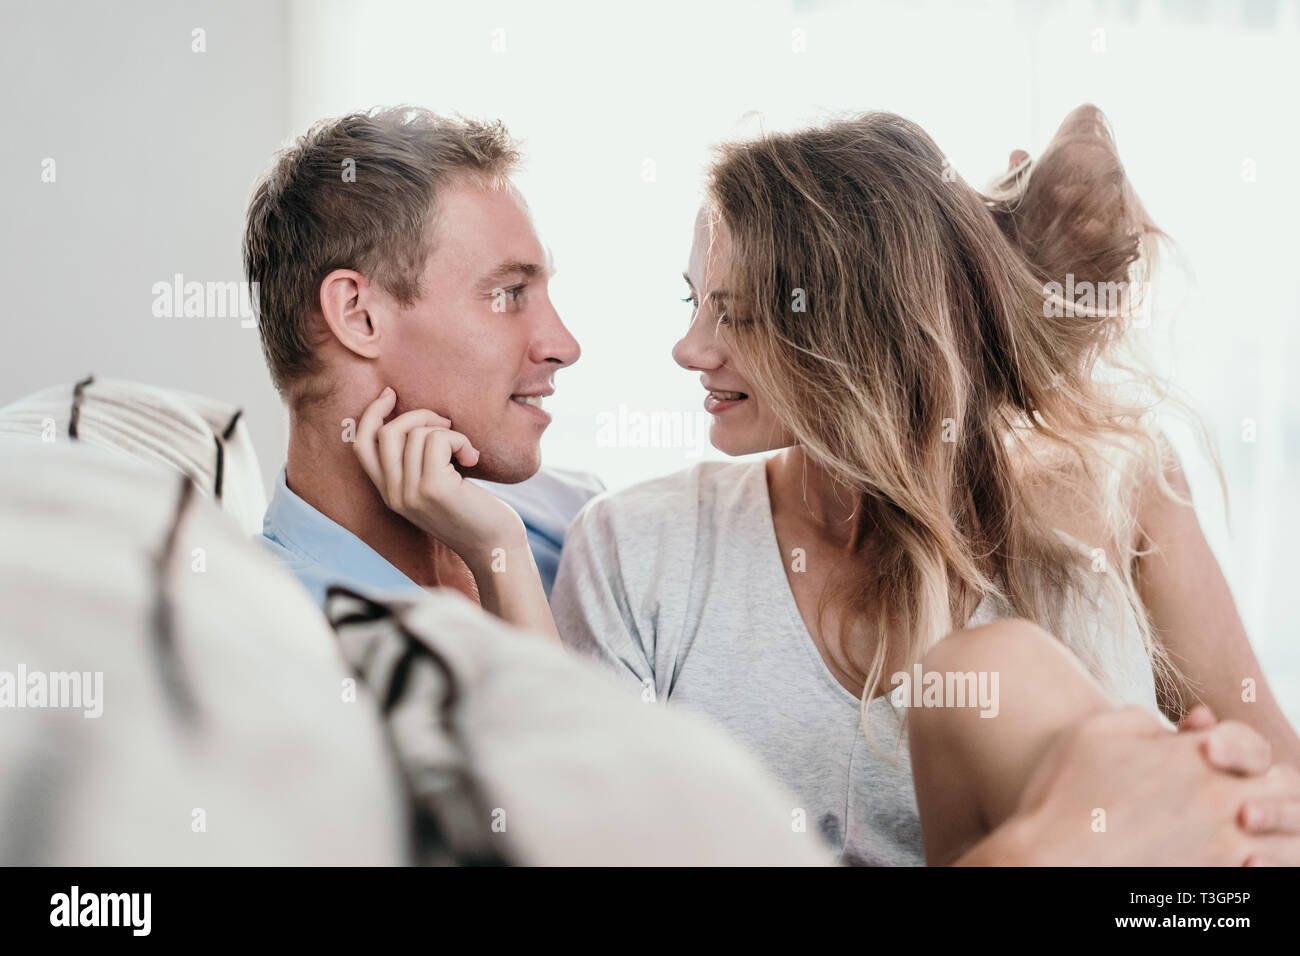 young couple embracing while sitting face to face on a couch Stock Photo